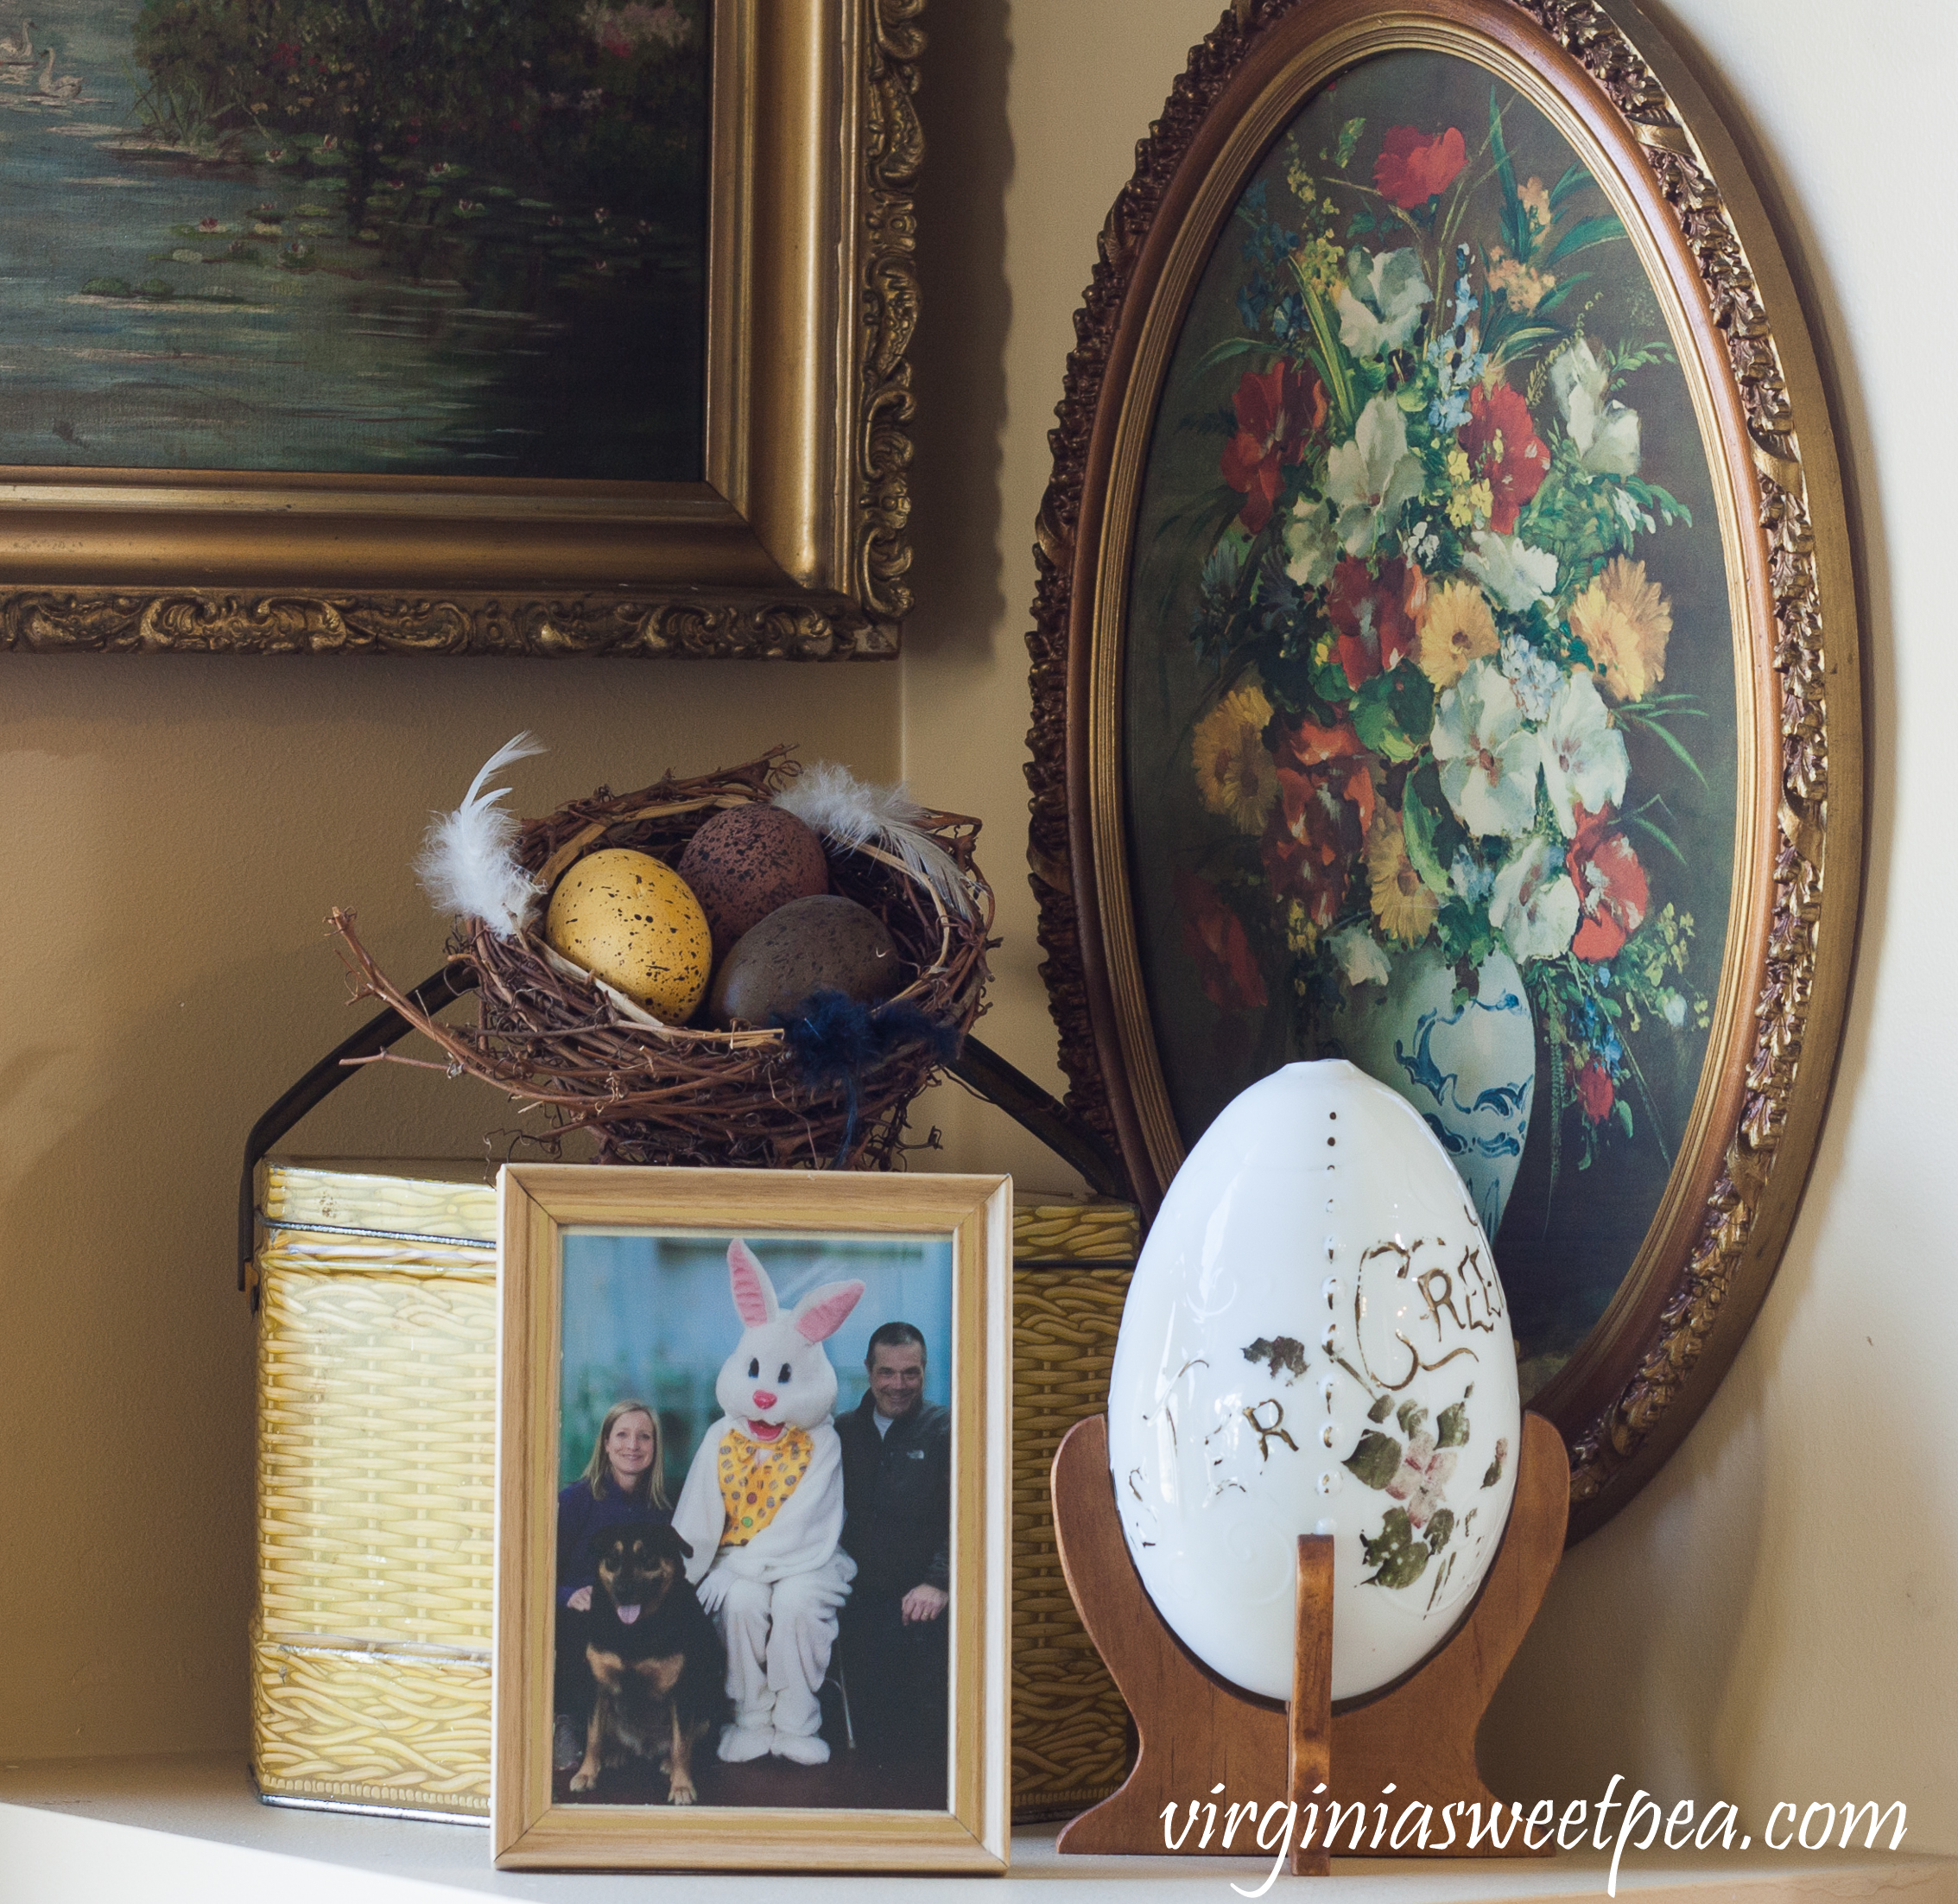 Easter Display with a vintage metal basket printed with a basketweave pattern, large china vintage egg printed with "Easter Greetings" and a family Easter picture